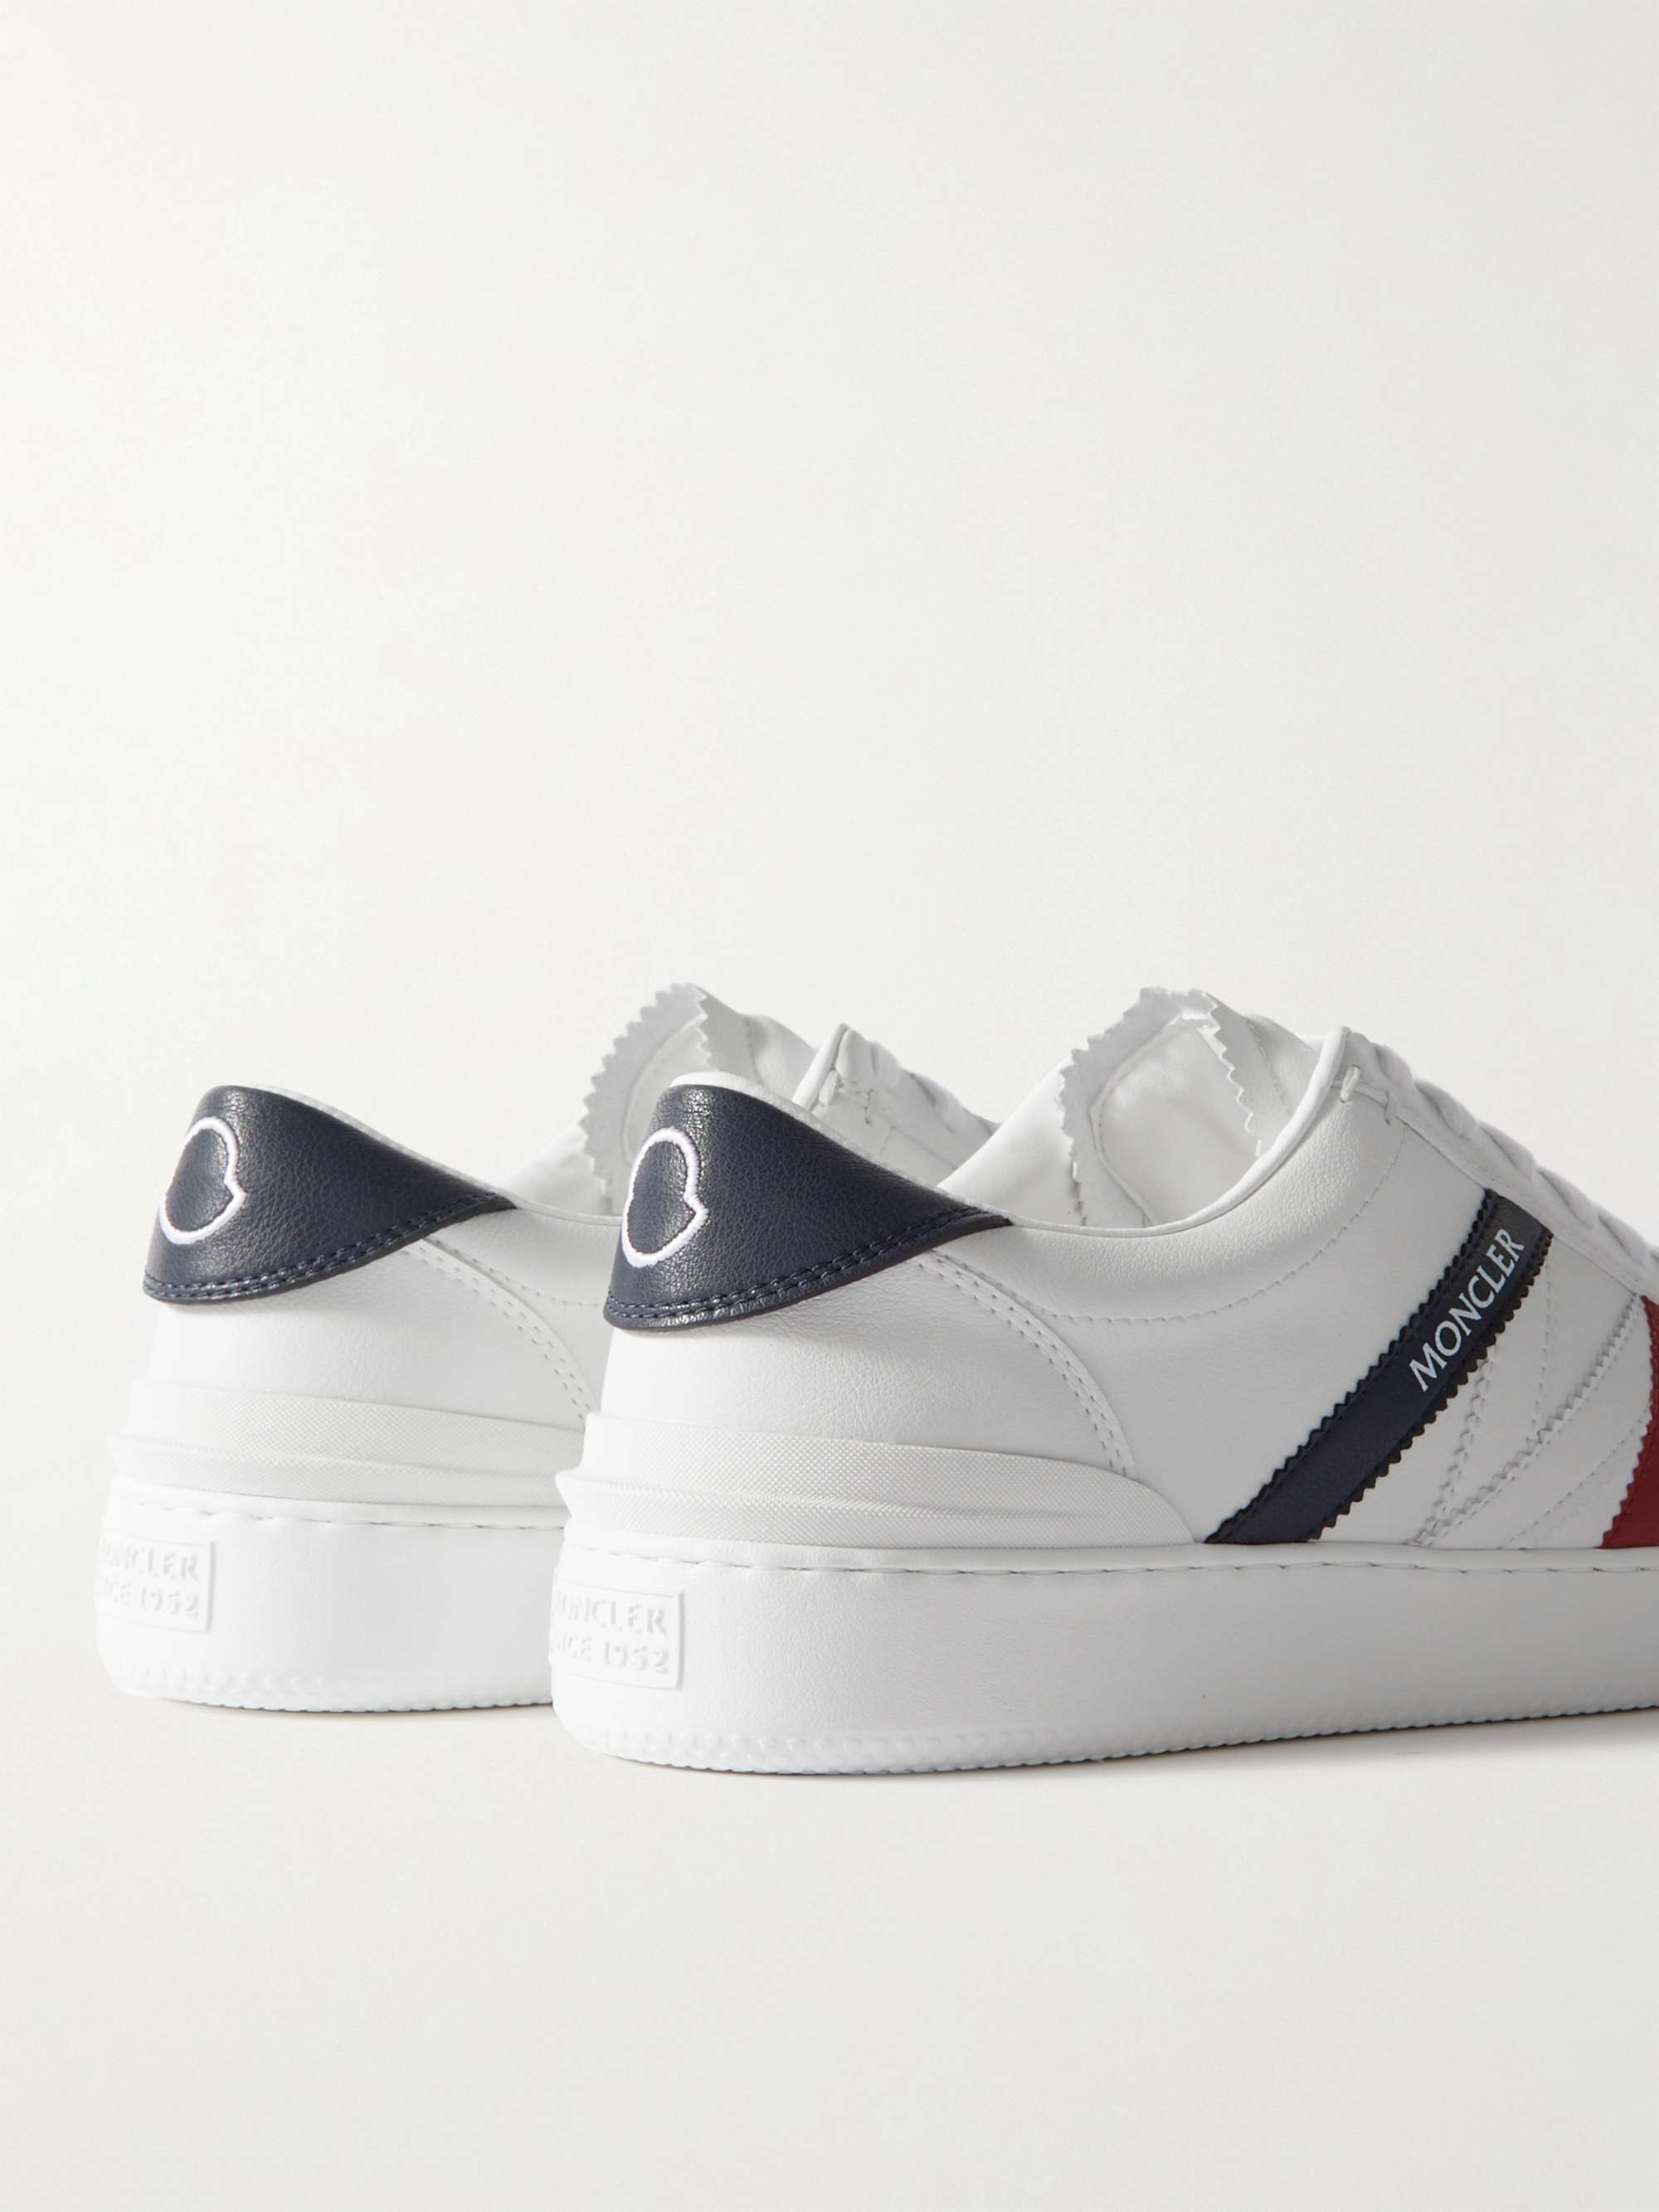 MONCLER Monaco M Striped Leather Sneakers